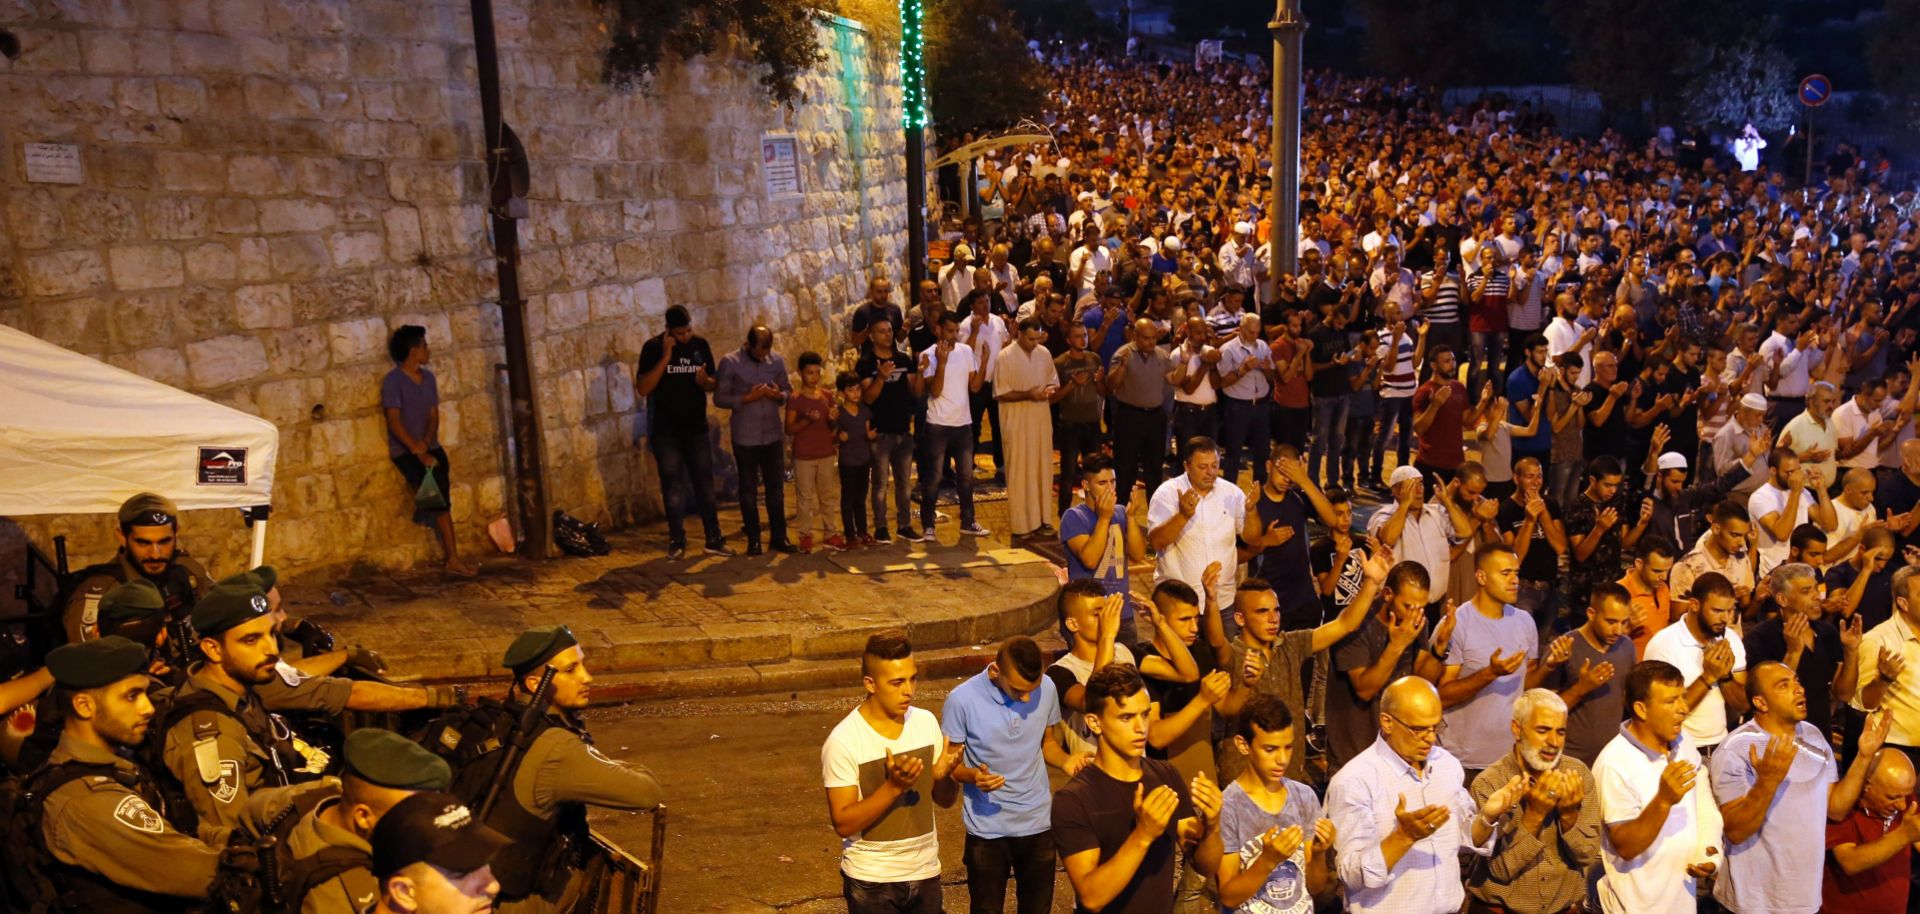 Largely peaceful protests outside Jerusalem's Al-Aqsa Mosque compound suggest that nonviolence may still have a role to play in the conflict between Israelis and Palestinians.